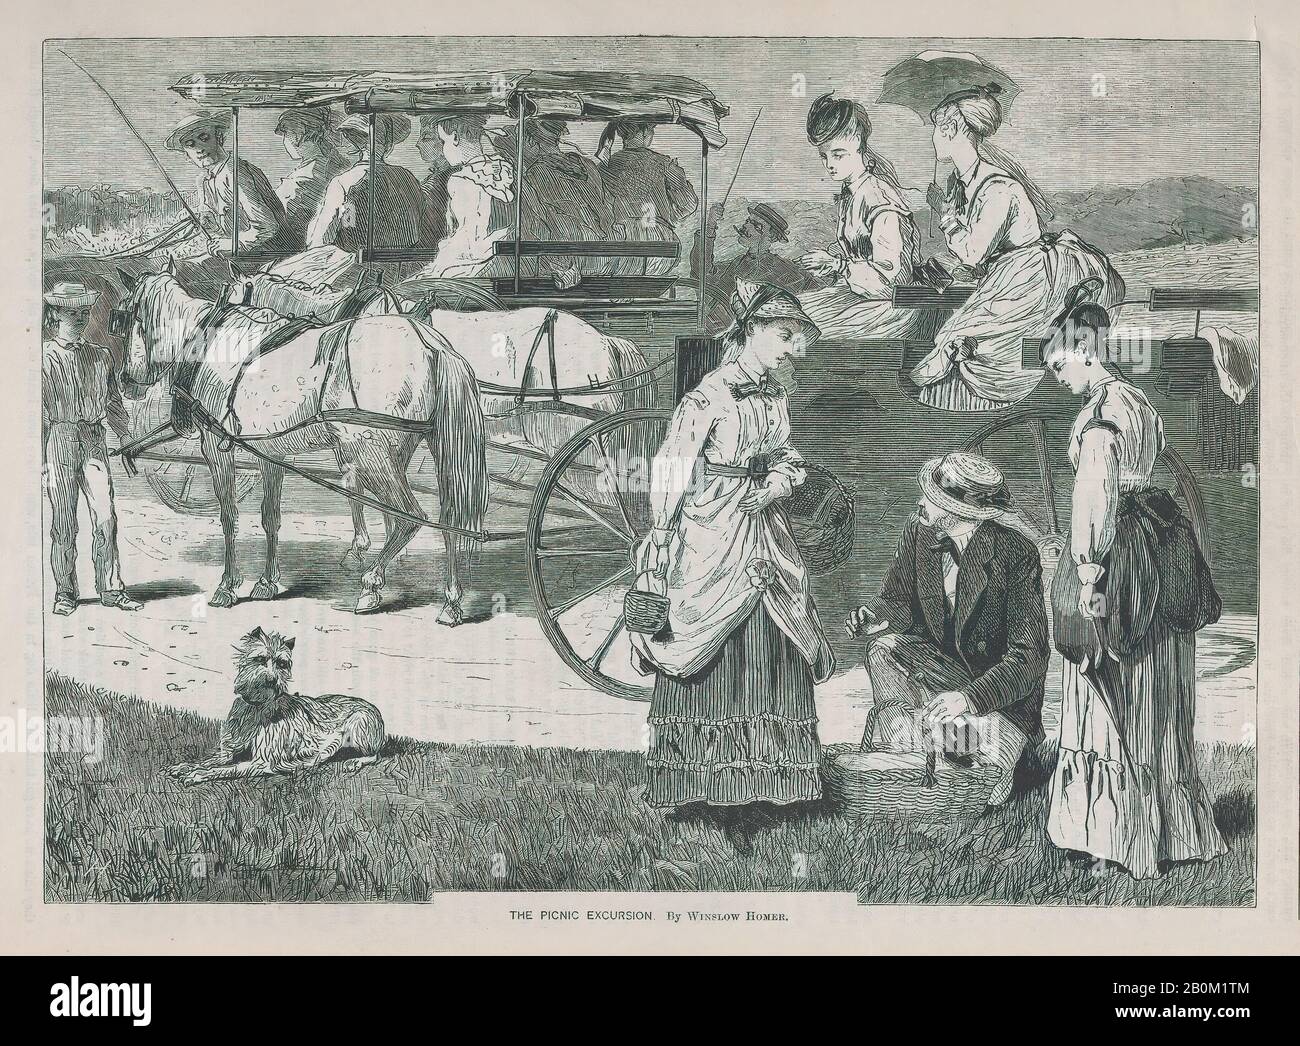 After Winslow Homer, The Picnic Excursion (Appleton's Journal, Vol. I), After Winslow Homer (American, Boston, Massachusetts 1836–1910 Prouts Neck, Maine), August 14, 1869, Wood engraving, image: 6 1/2 x 9 1/8 in. (16.5 x 23.2 cm), sheet: 7 11/16 x 11 in. (19.5 x 28 cm), Prints Stock Photo